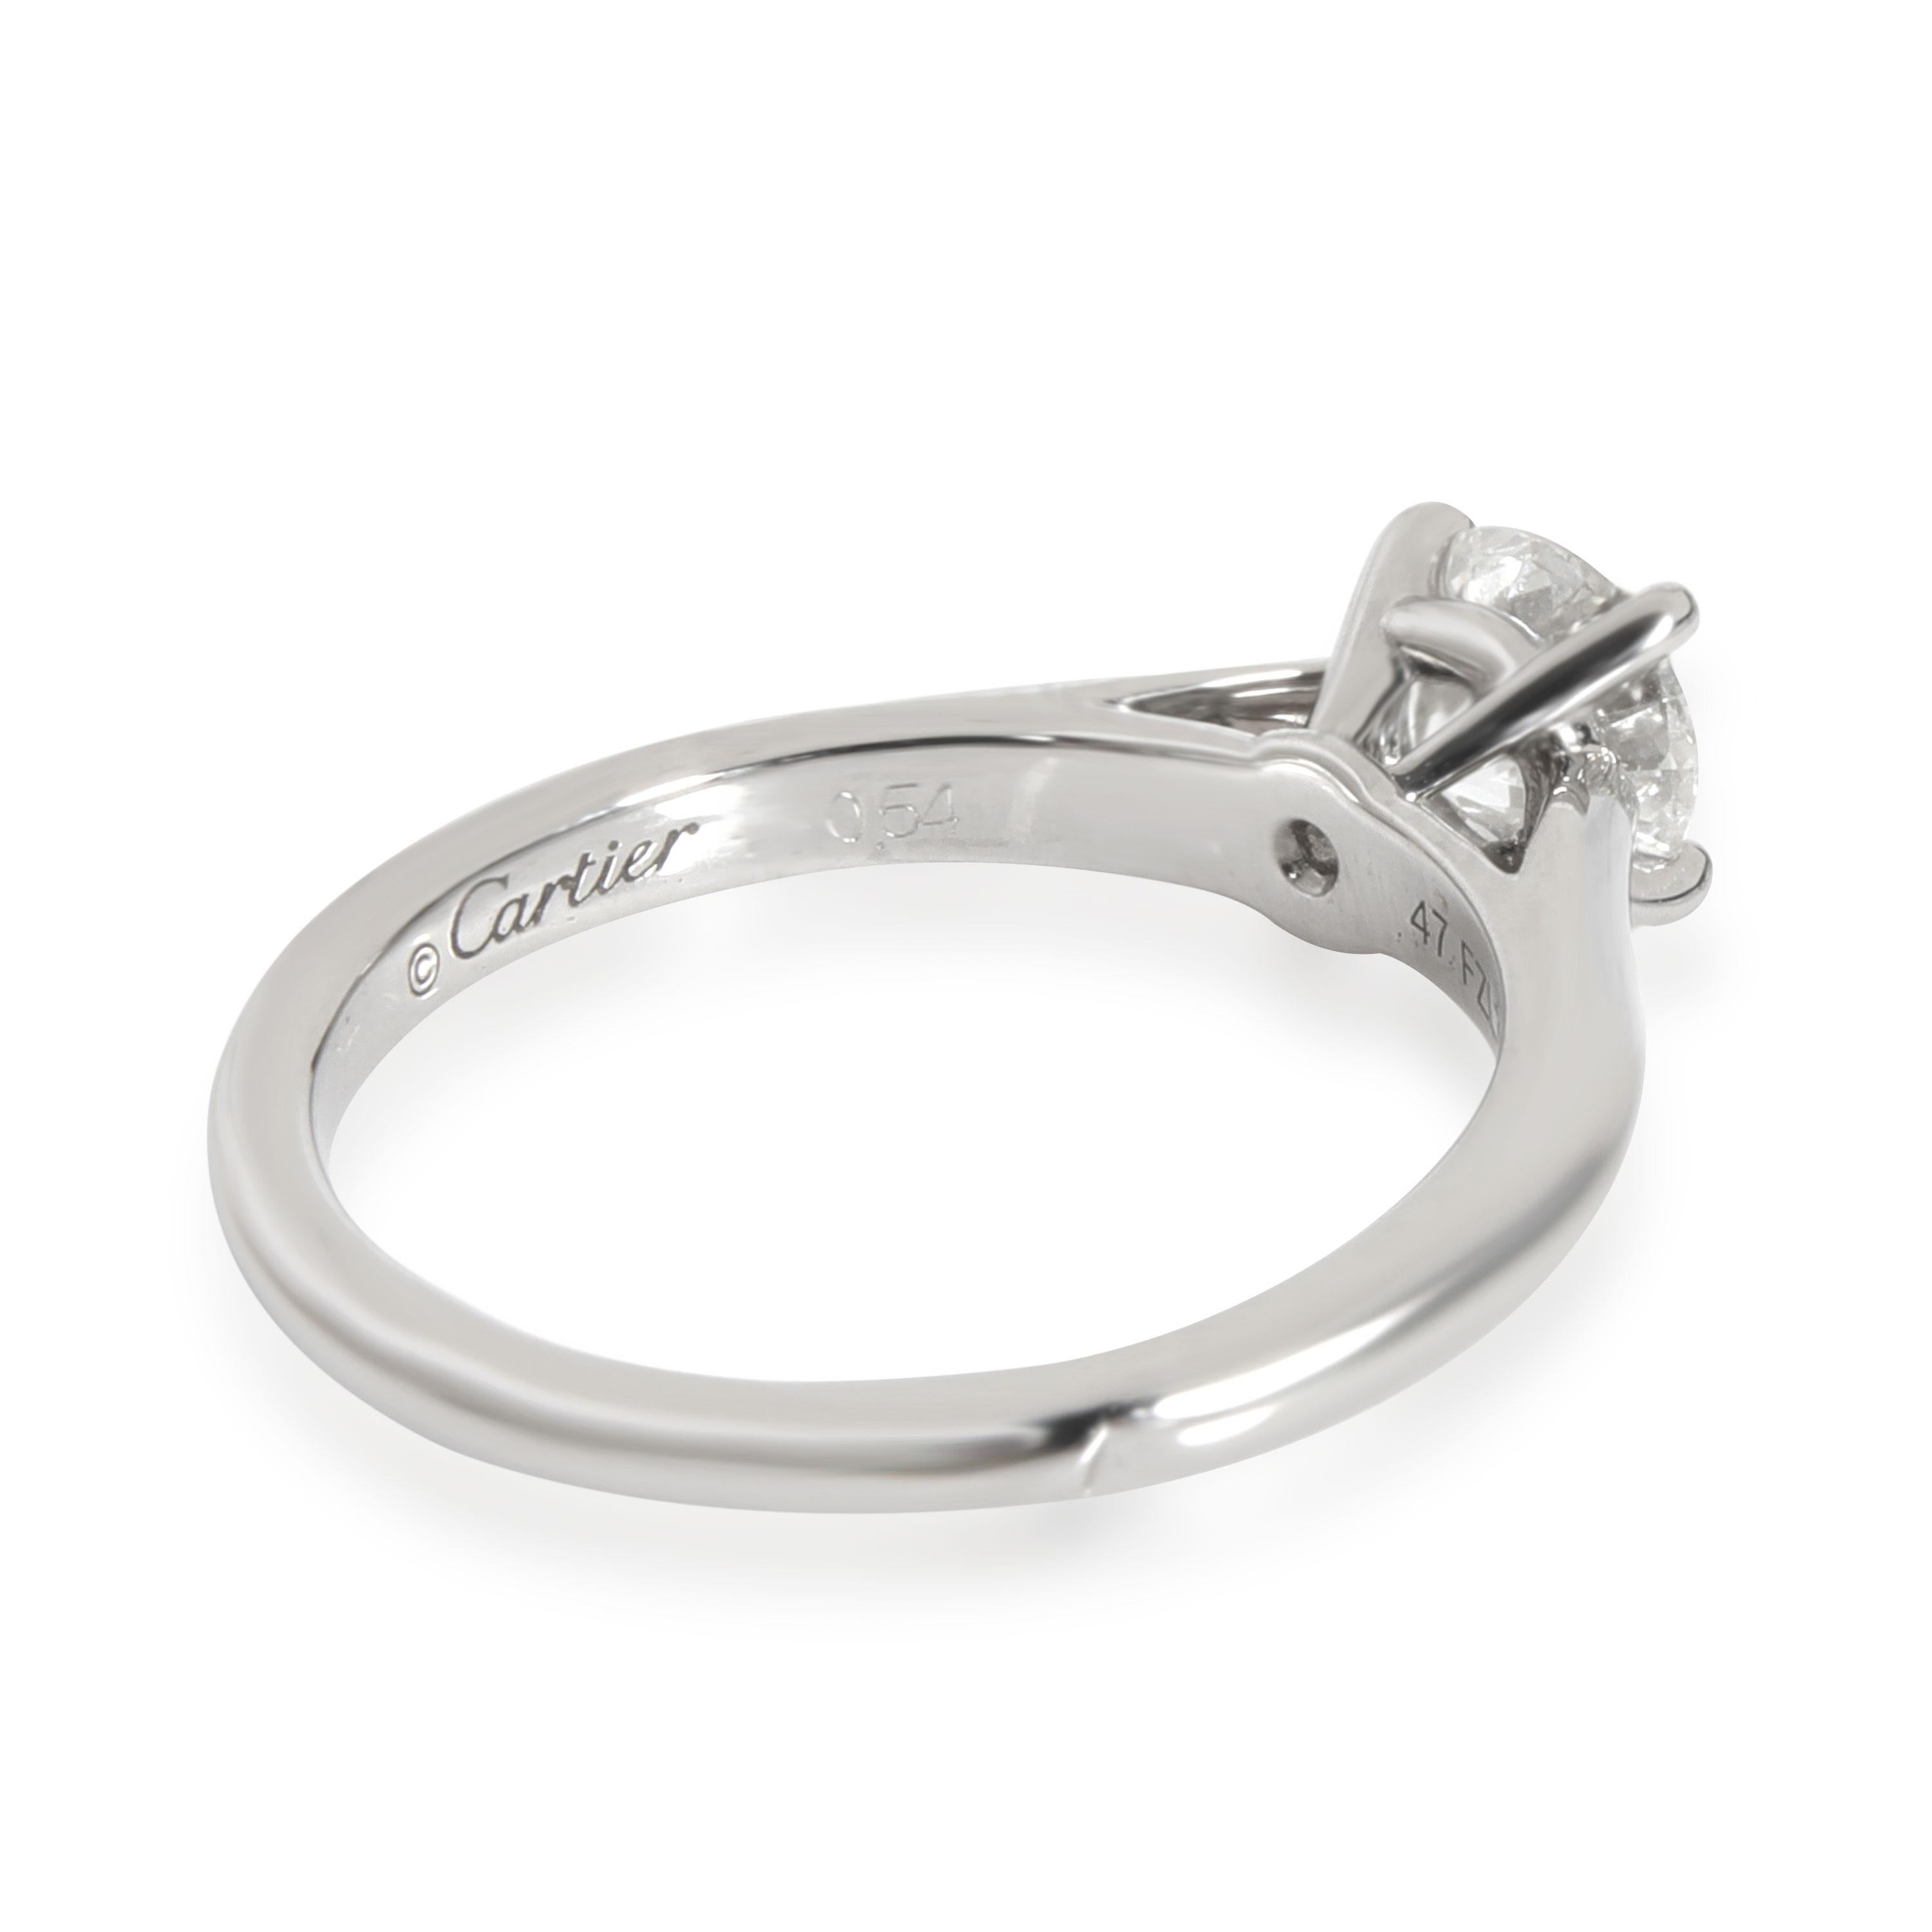 Cartier Solitaire 1895 Diamond Engagement Ring in Platinum G VS1 0.54 CTW

PRIMARY DETAILS
SKU: 110786
Listing Title: Cartier Solitaire 1895 Diamond Engagement Ring in Platinum G VS1 0.54 CTW
Condition Description: Retails for 2,900 USD. In